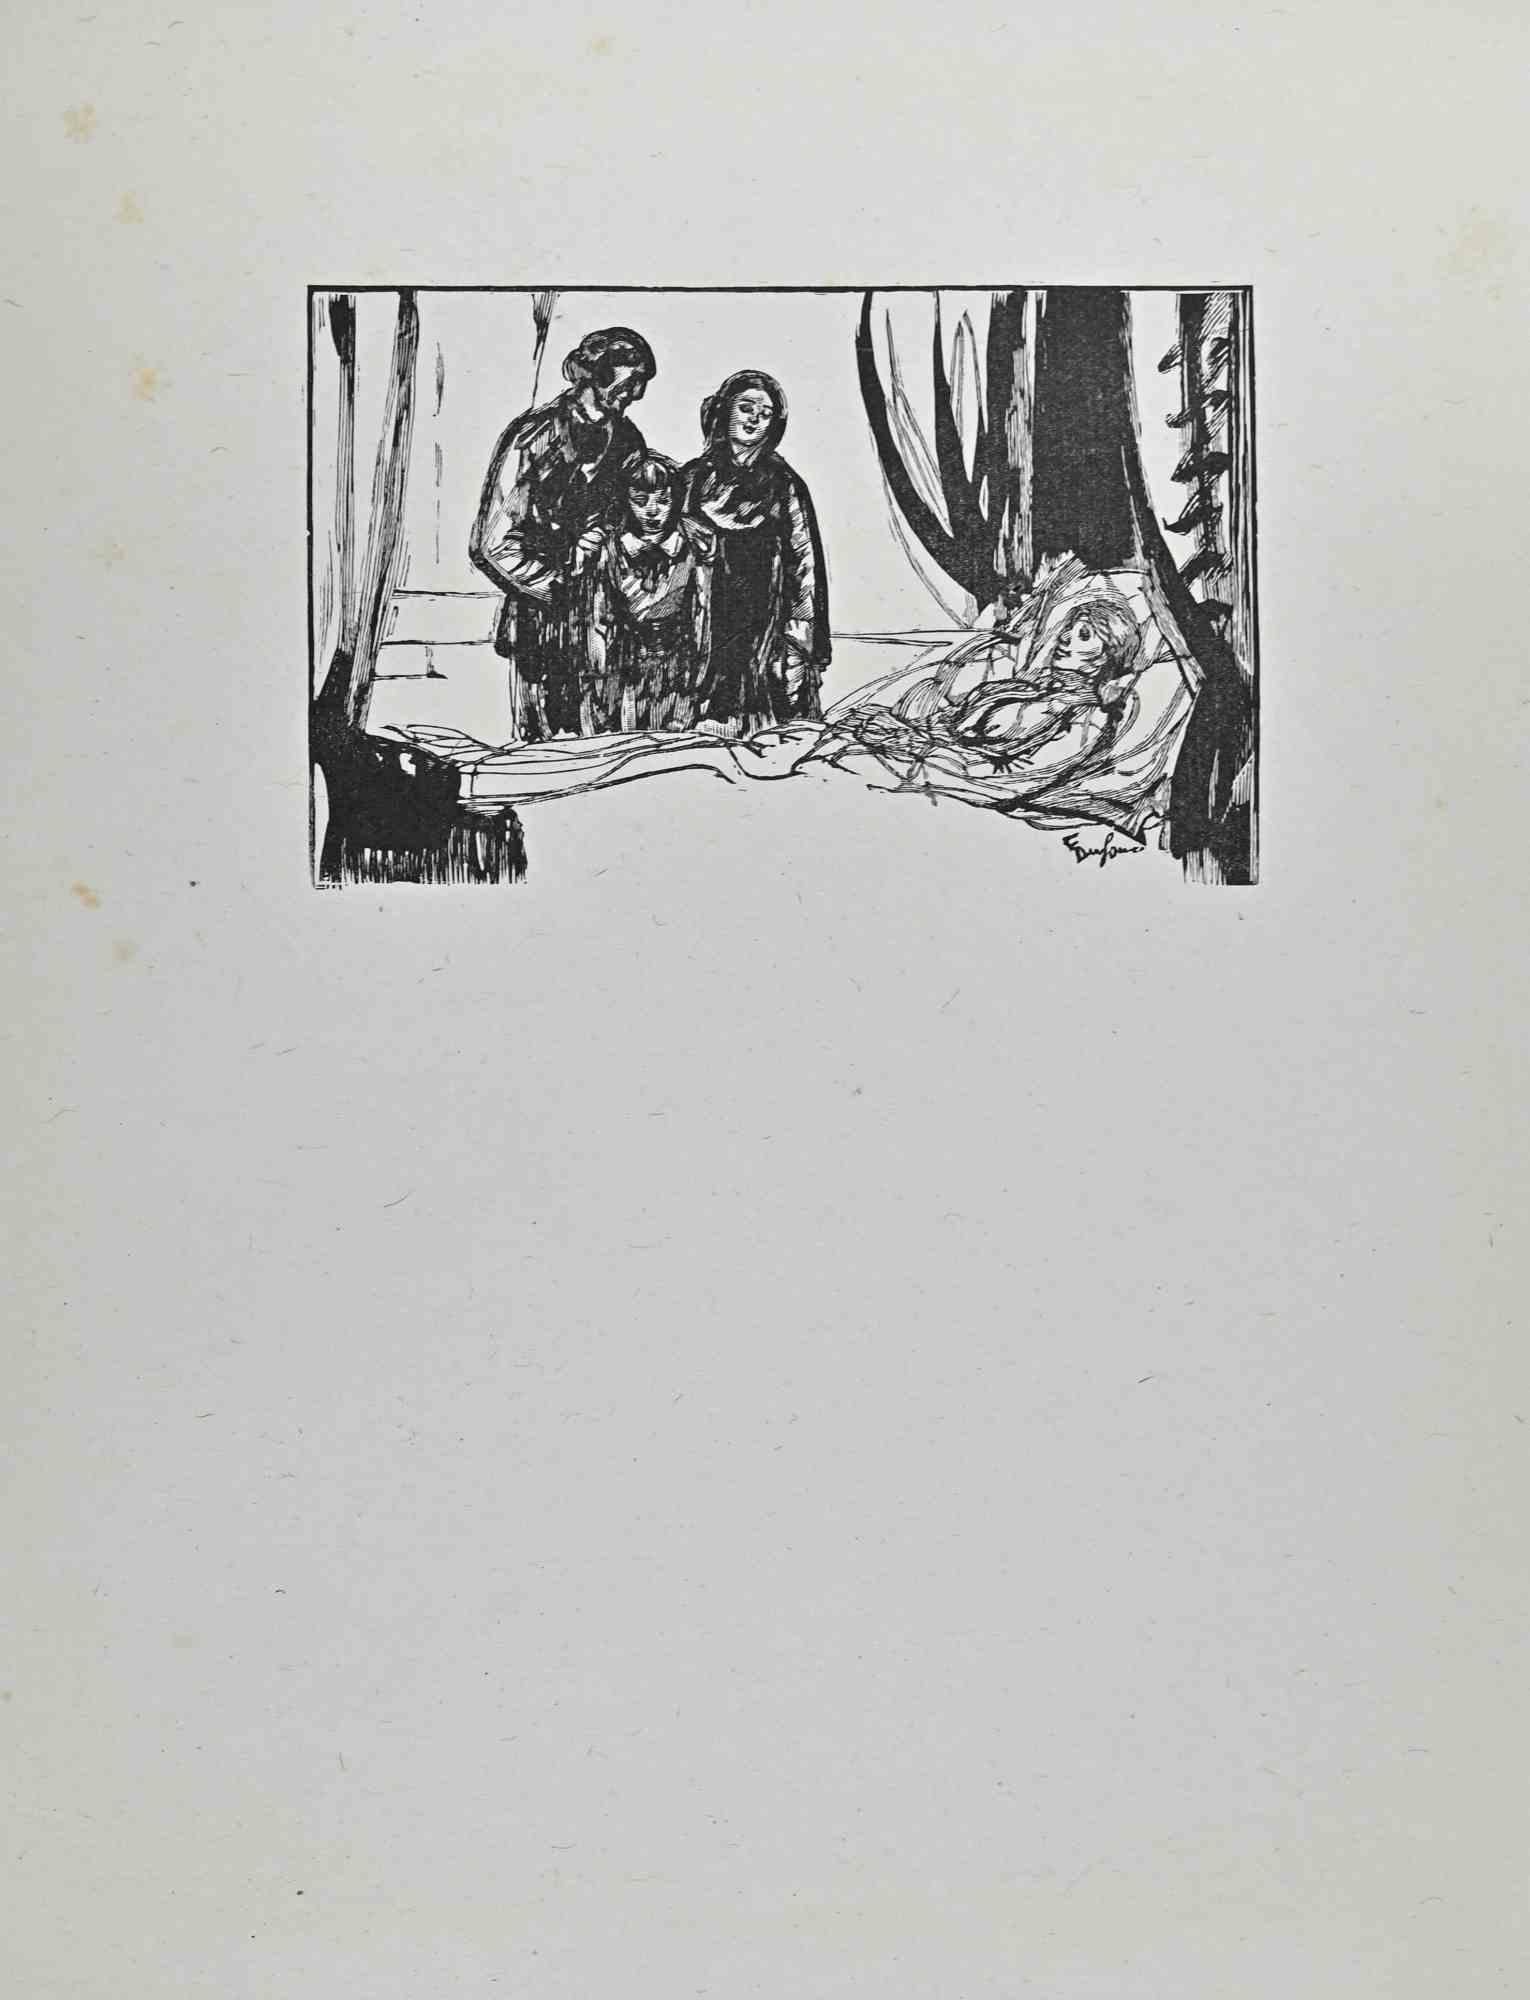 The Sick Mother is a woodcut print on ivory-colored paper realized by Paul Baudier (1881-1962) in the 1930s.

Good conditions with some spots.

Paul Baudier, (born October 18, 1881 in Paris and died December 9, 1962 in Châtillon), was a French